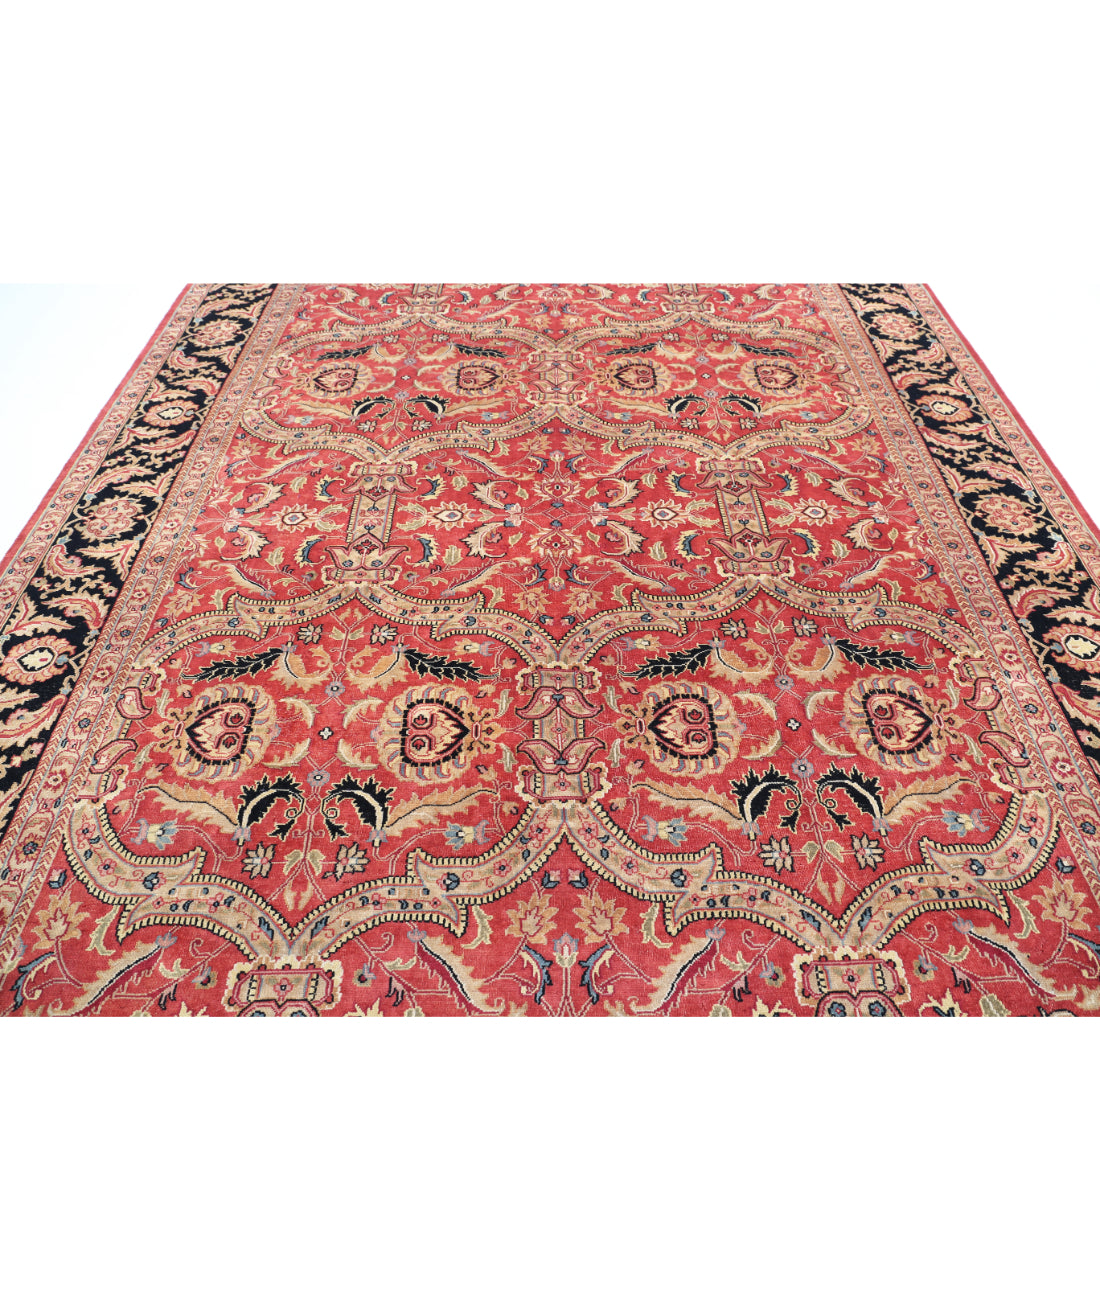 Agra 9'5'' X 12'5'' Hand-Knotted Wool Rug 9'5'' x 12'5'' (75 X 580) / Red / Black